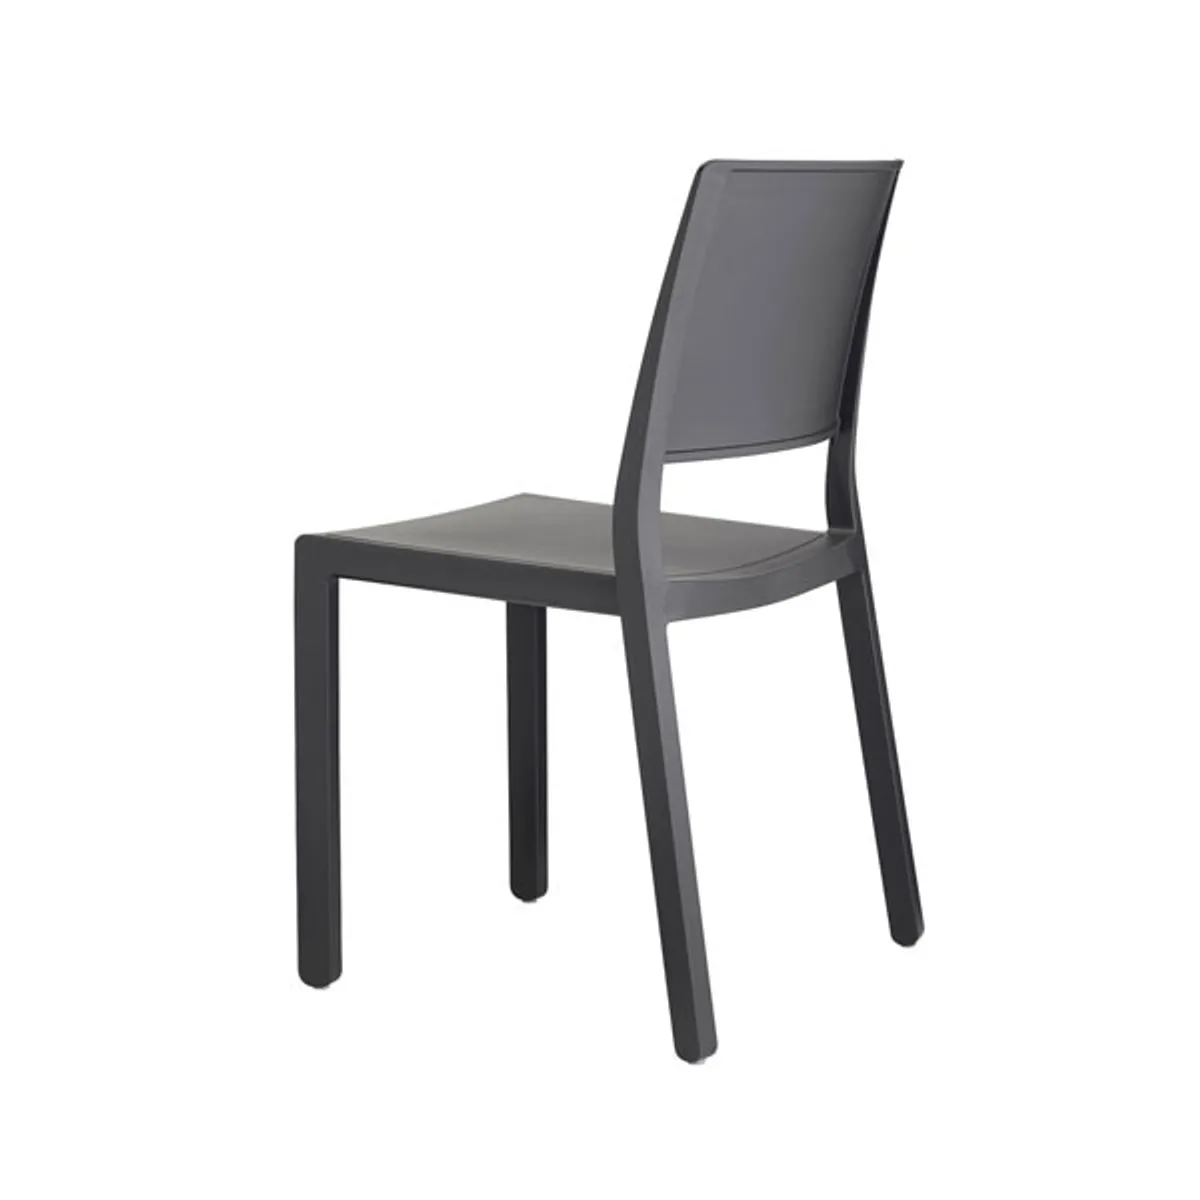 Remi side chair 9 Inside Out Contracts